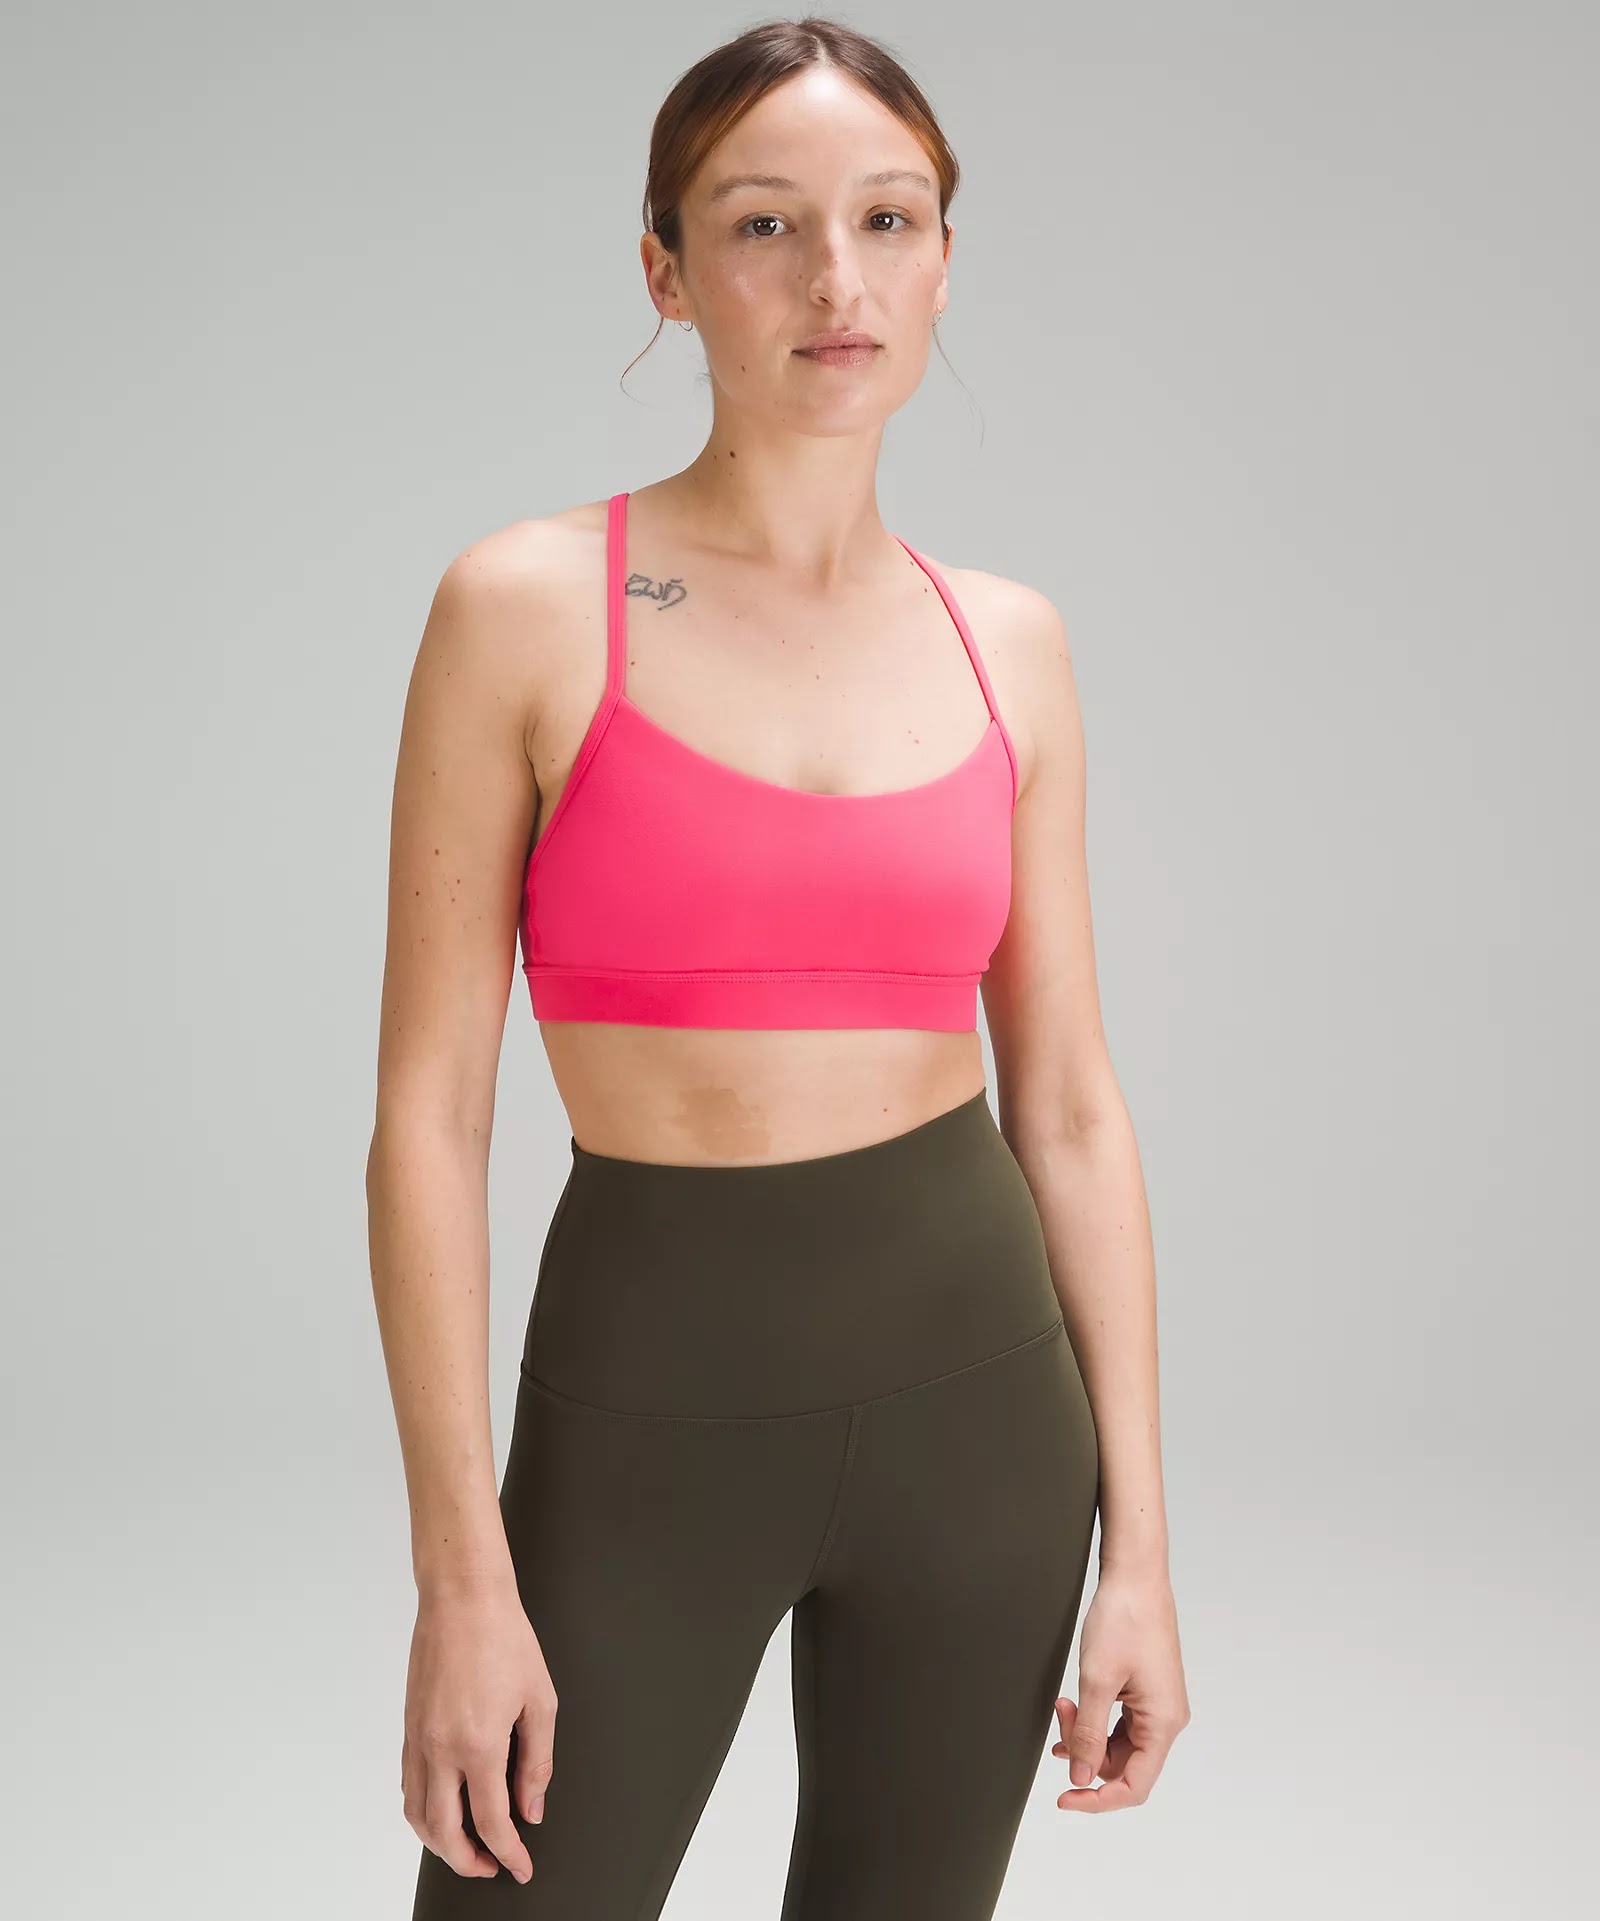 Shop the new Madhappy and lululemon collection, live now